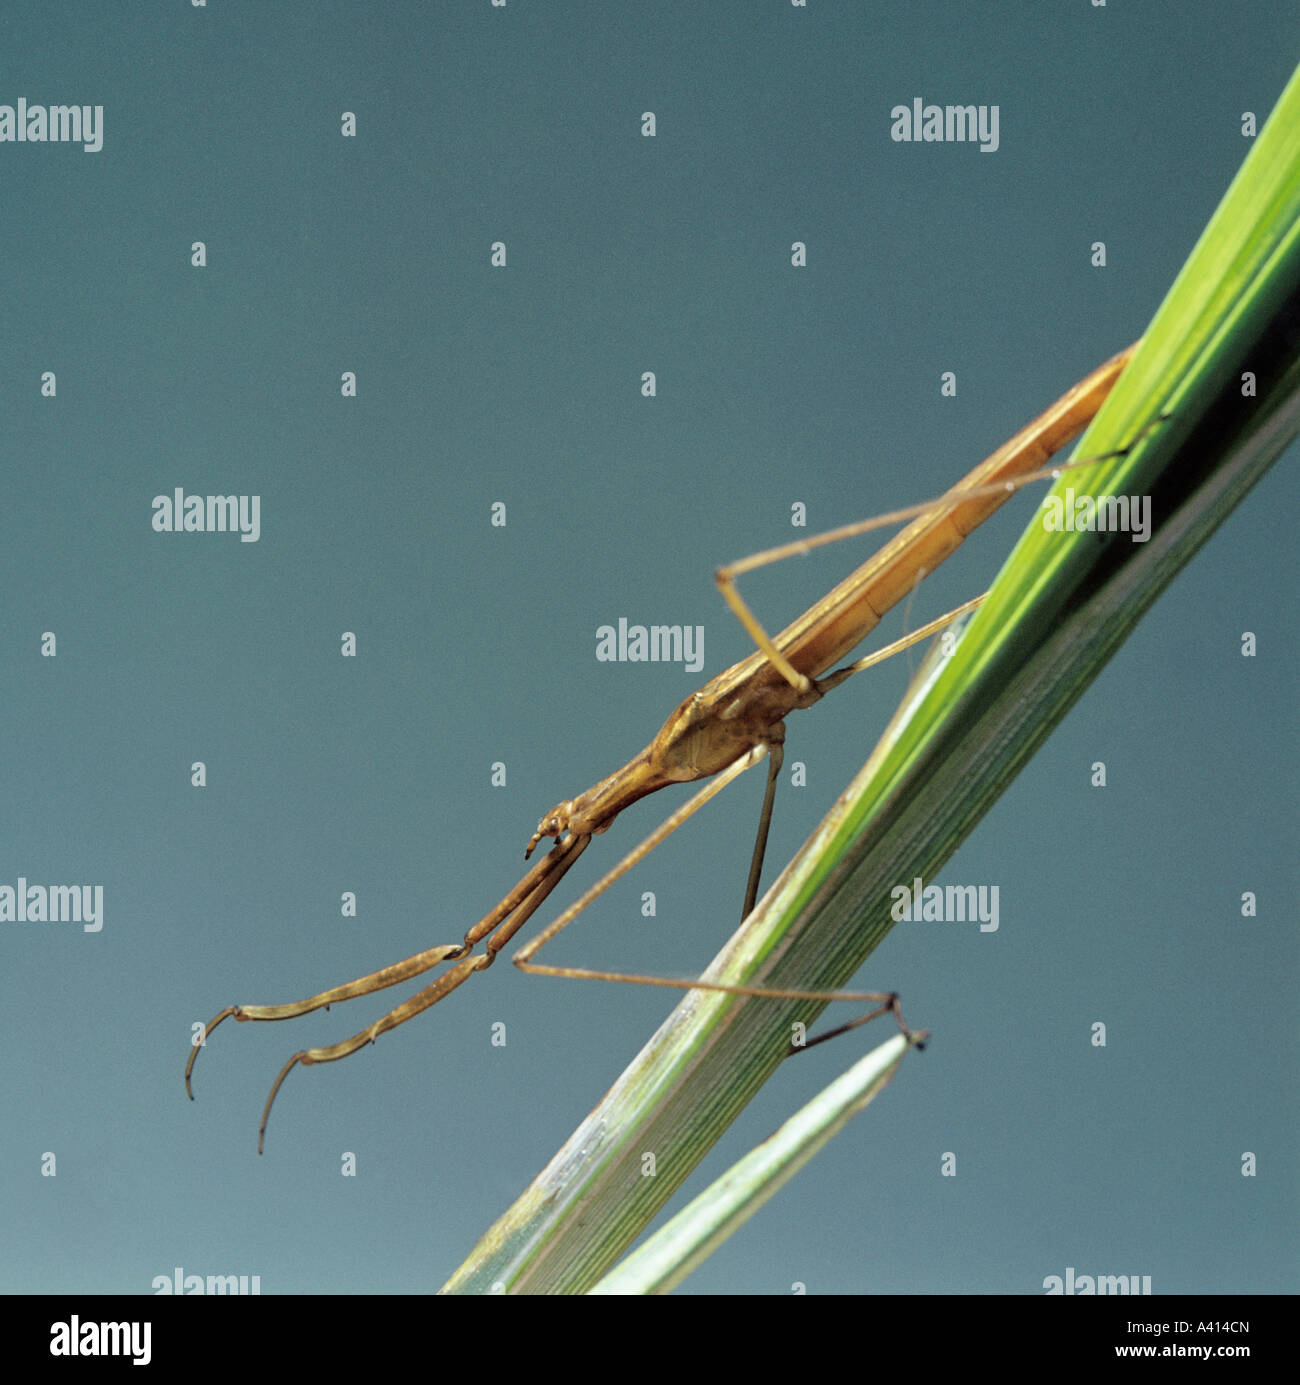 Water stick insect Ranatra linearis showing the forelegs adated for grasping prey Stock Photo